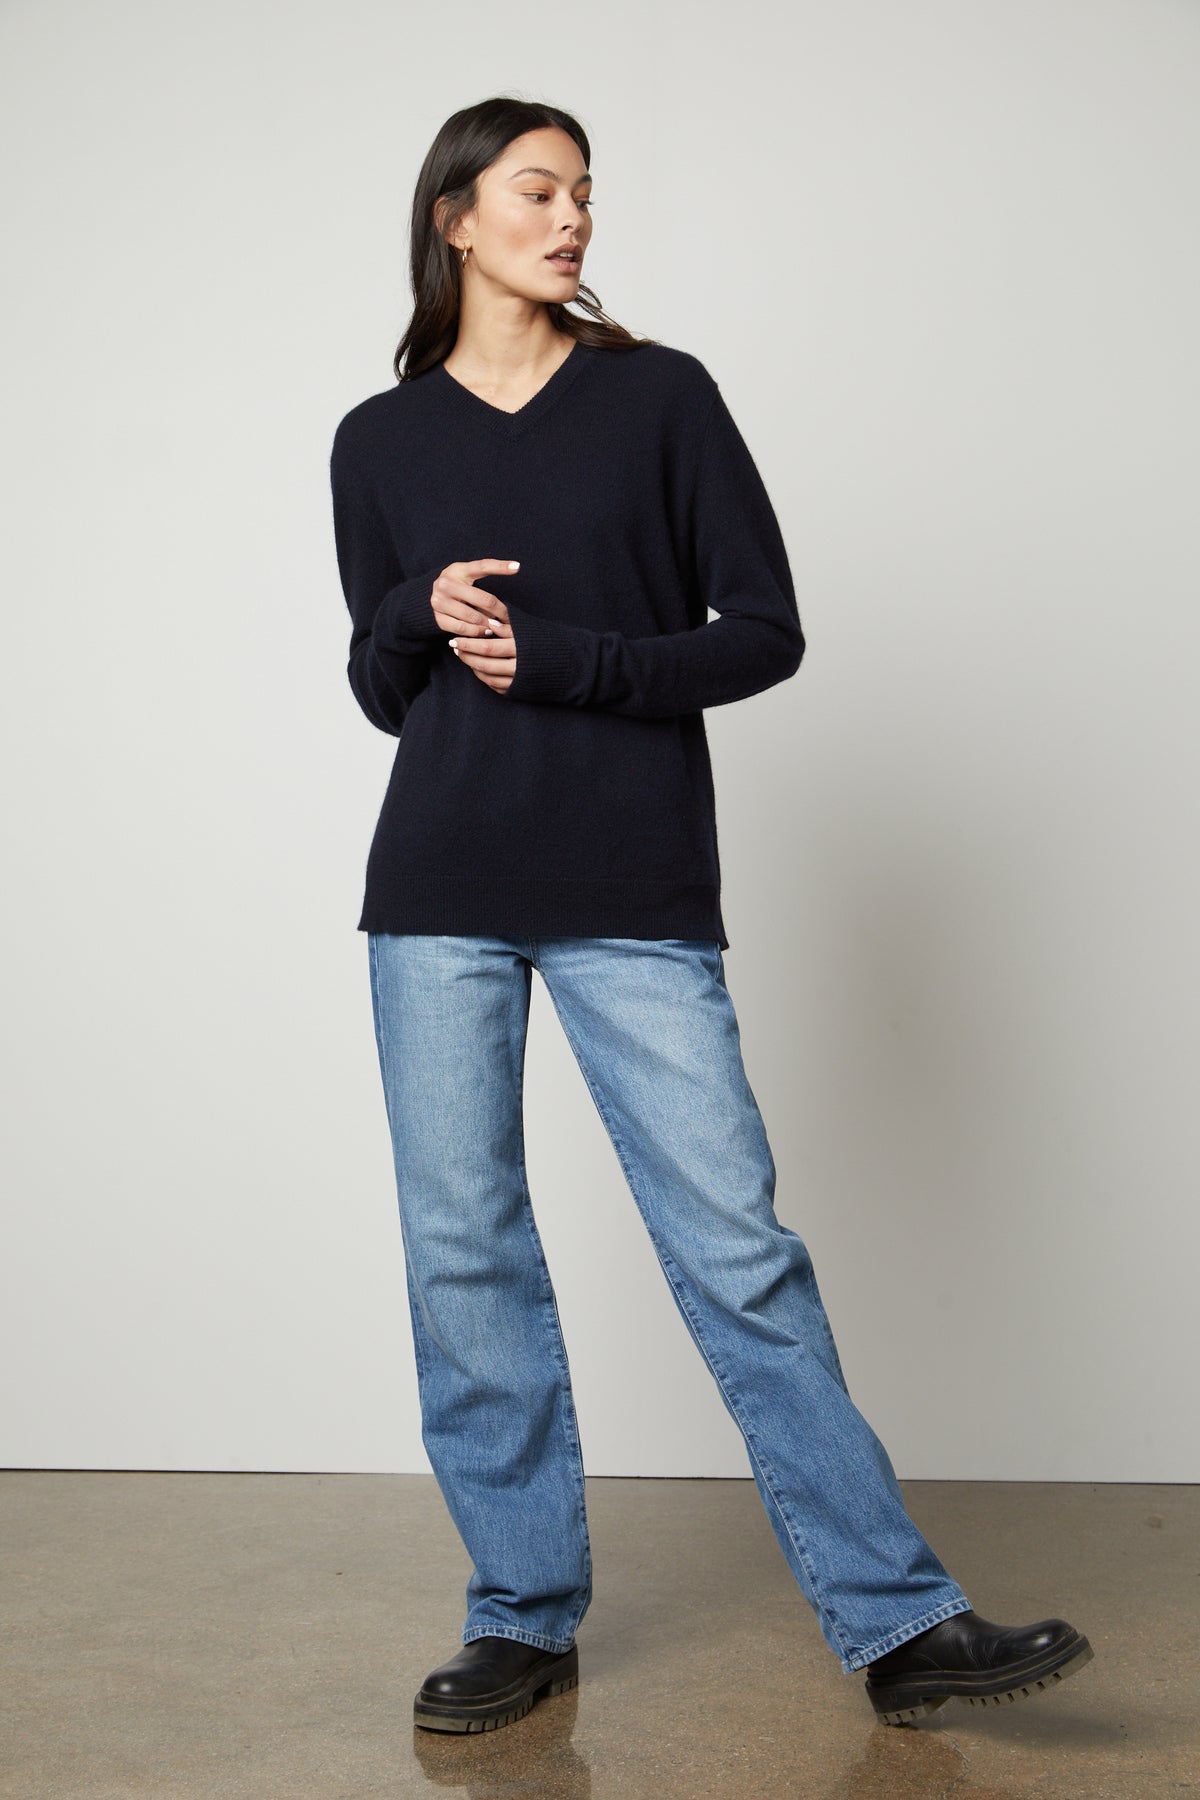 The model is wearing jeans and a Velvet by Graham & Spencer Harmony Cashmere V-Neck Sweater.-26897789649089